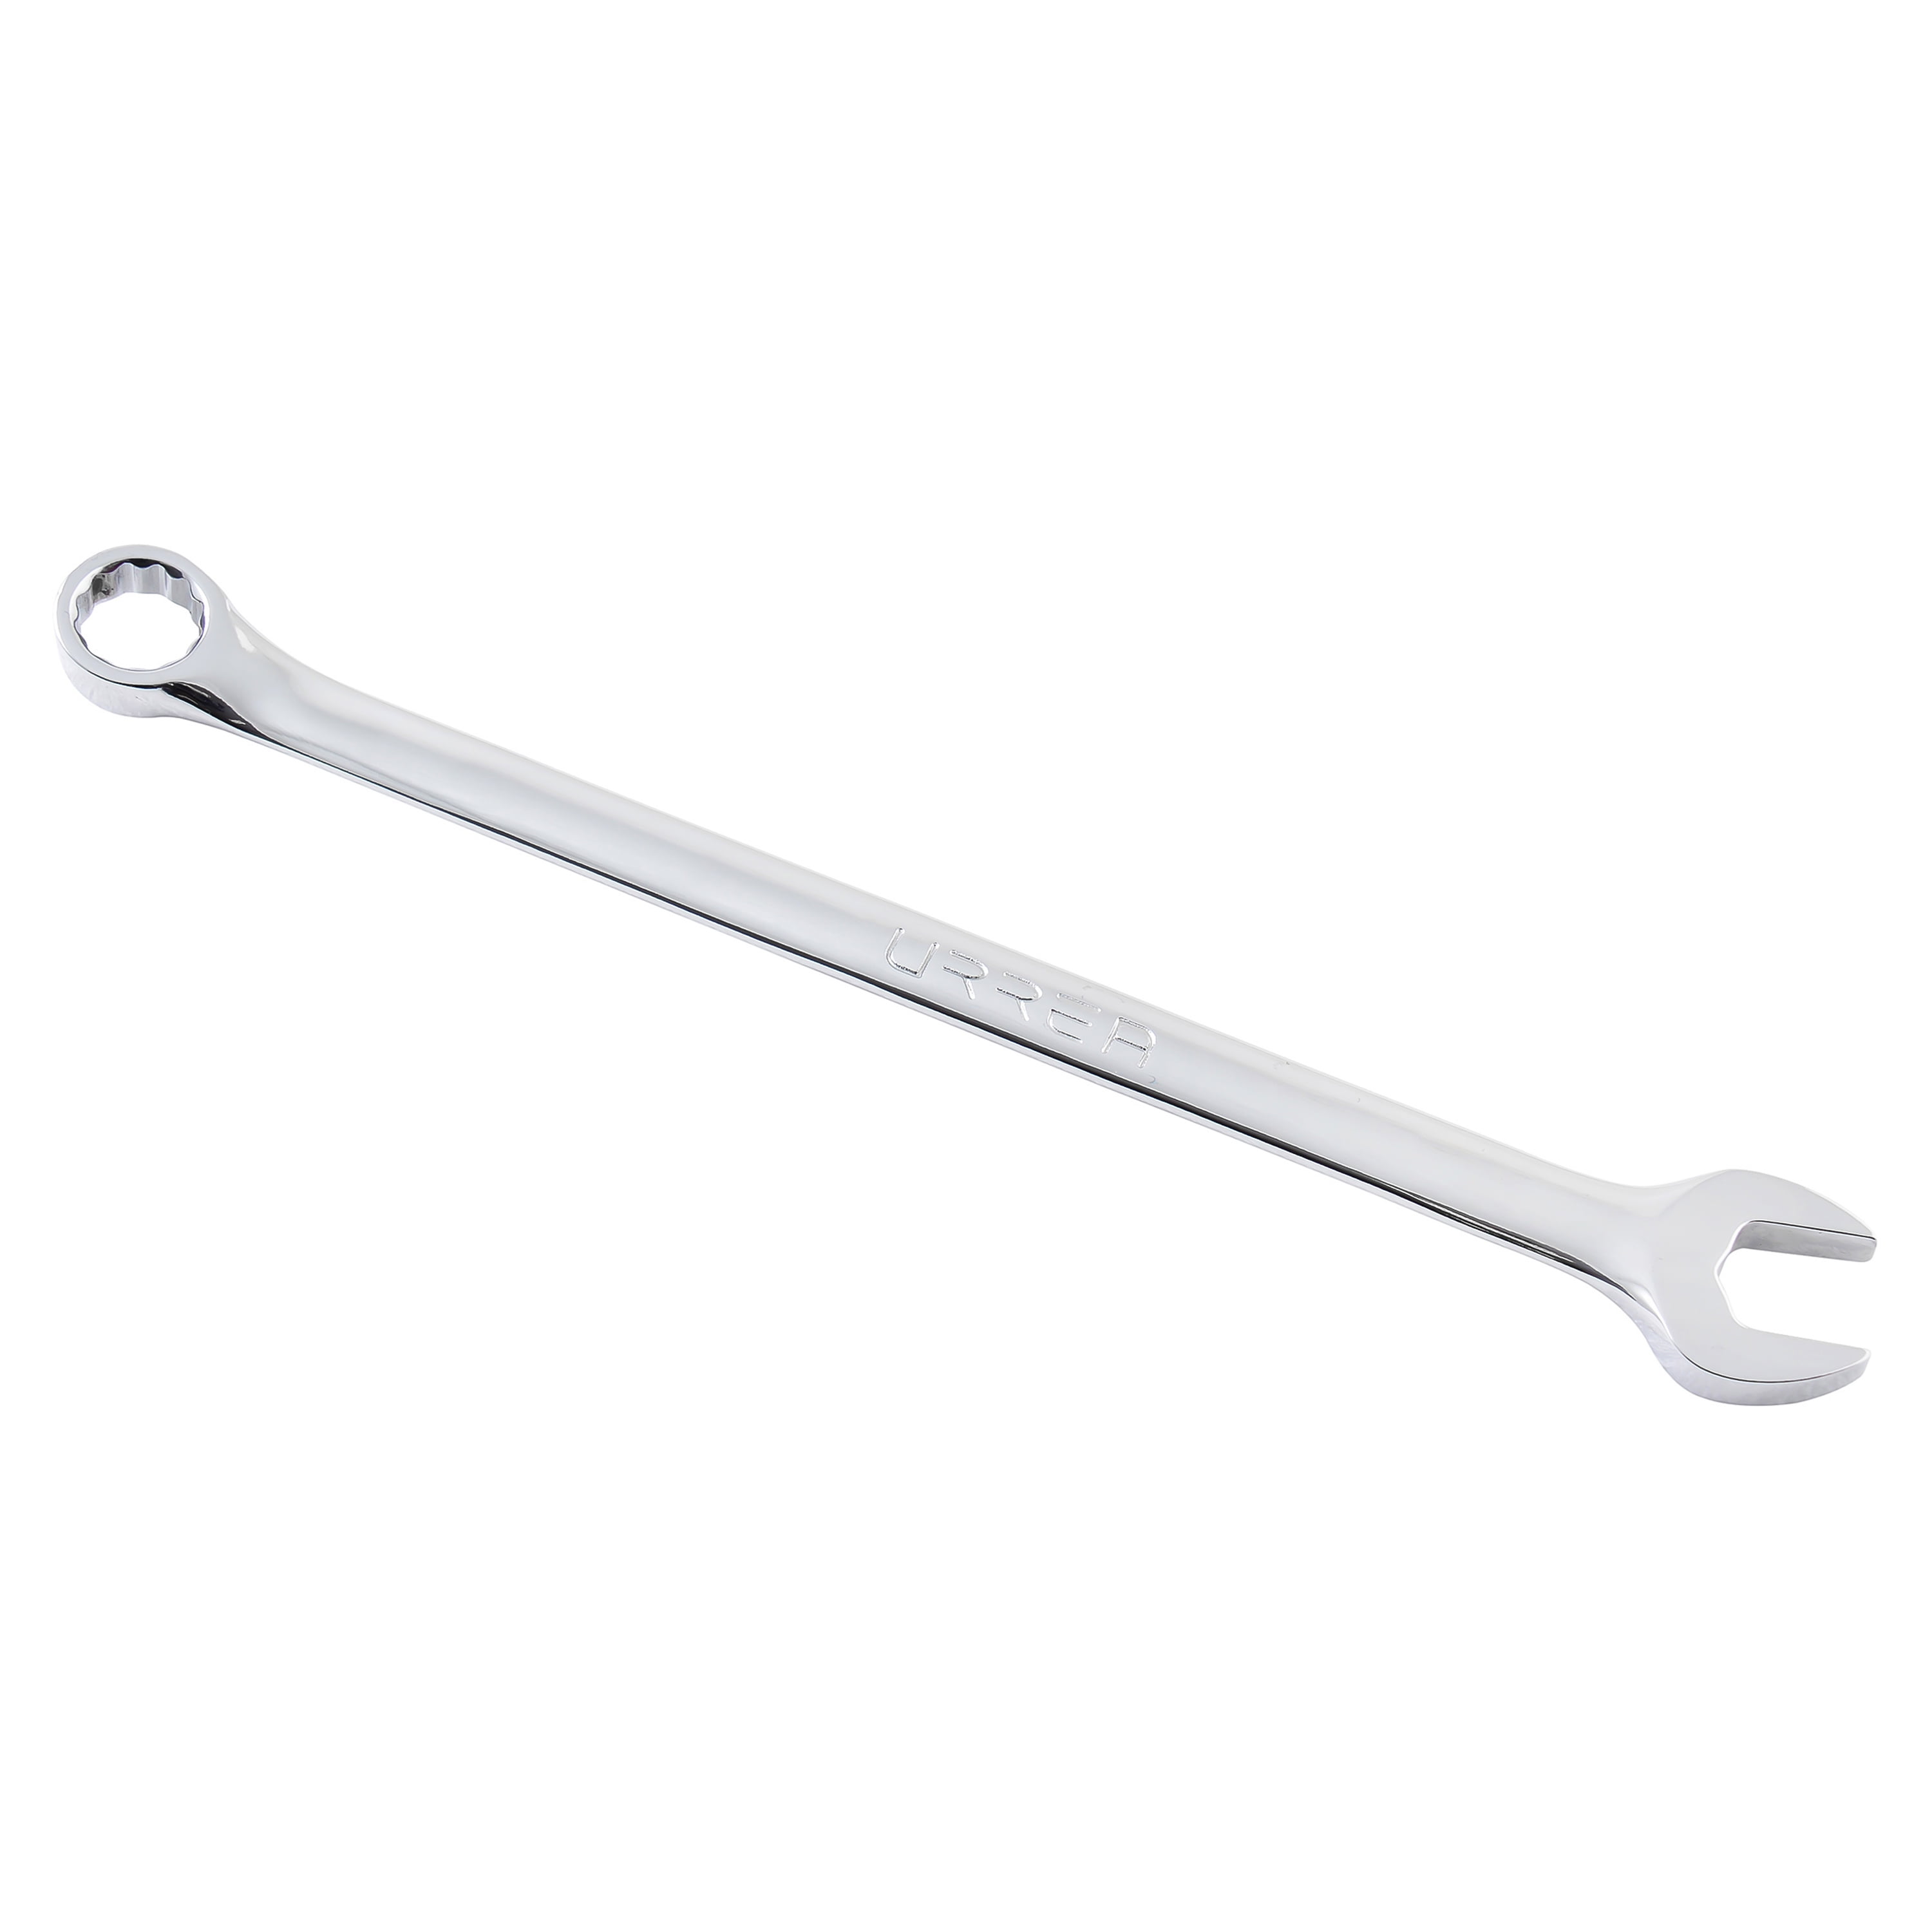 14mm Ratcheting Combination Wrench 12 Point 180 Degree Flex Head 3LU46 